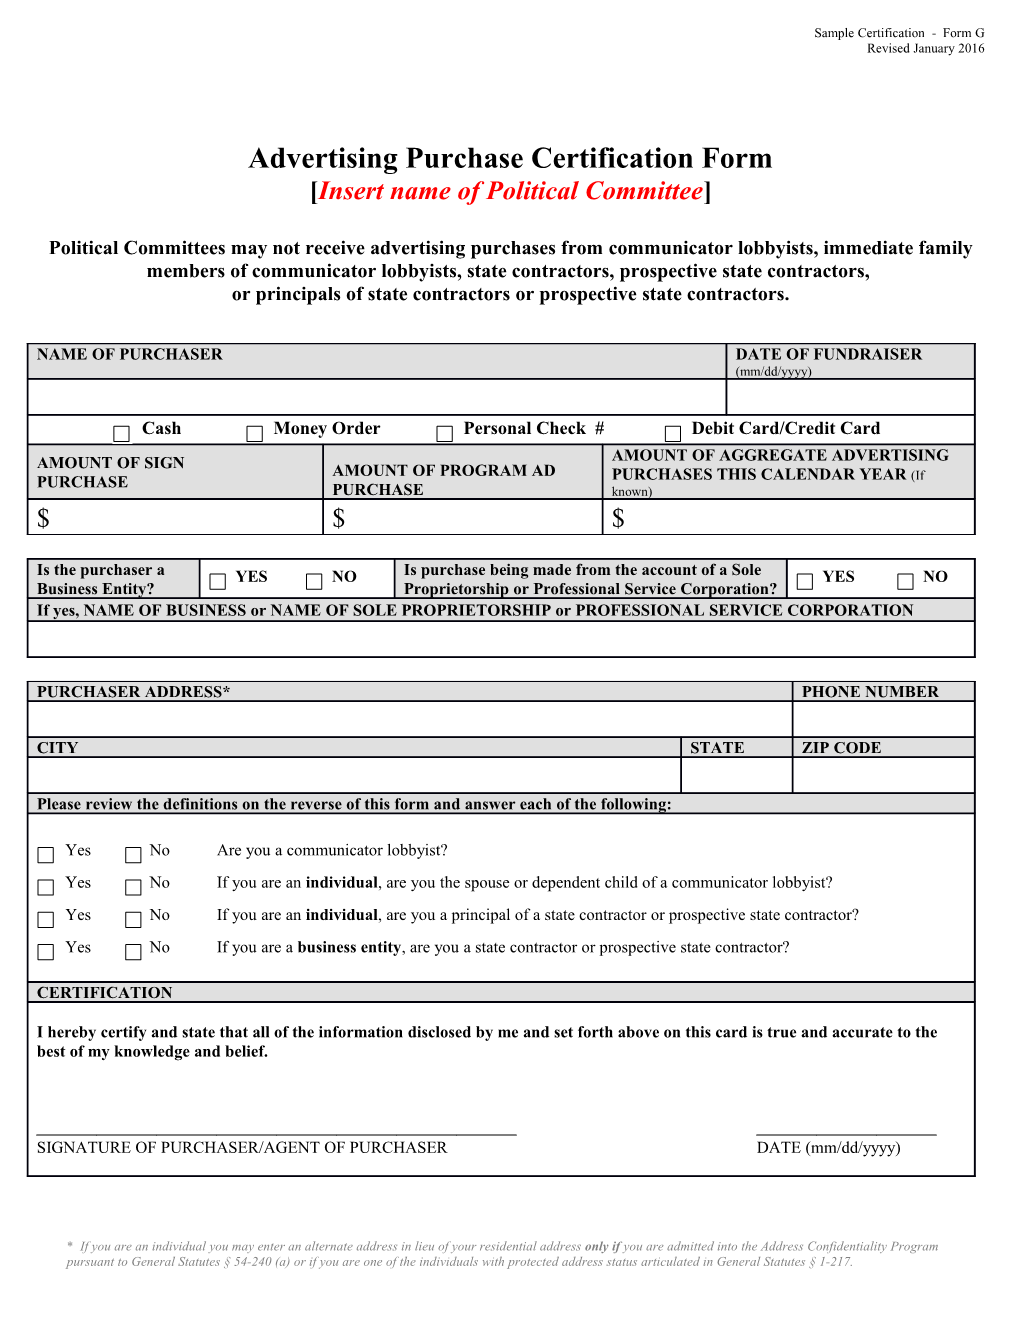 Suggested Contribution Compliance Form for A